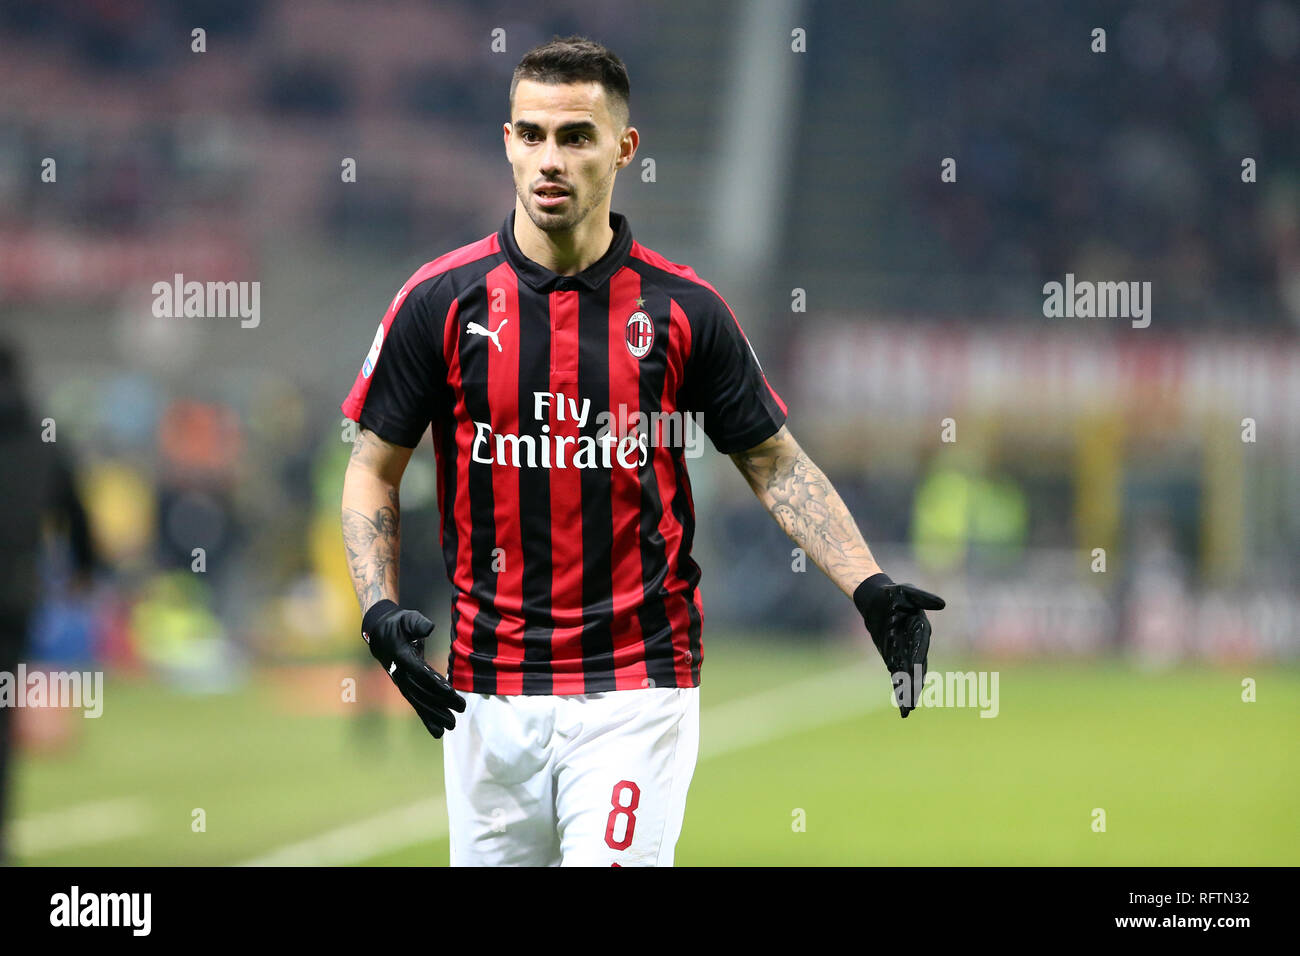 Milano, Italy. 26th January, 2019. Suso of Ac Milan in action during the  Serie A football match between AC Milan and Ssc Napoli. Credit: Marco  Canoniero/Alamy Live News Stock Photo - Alamy